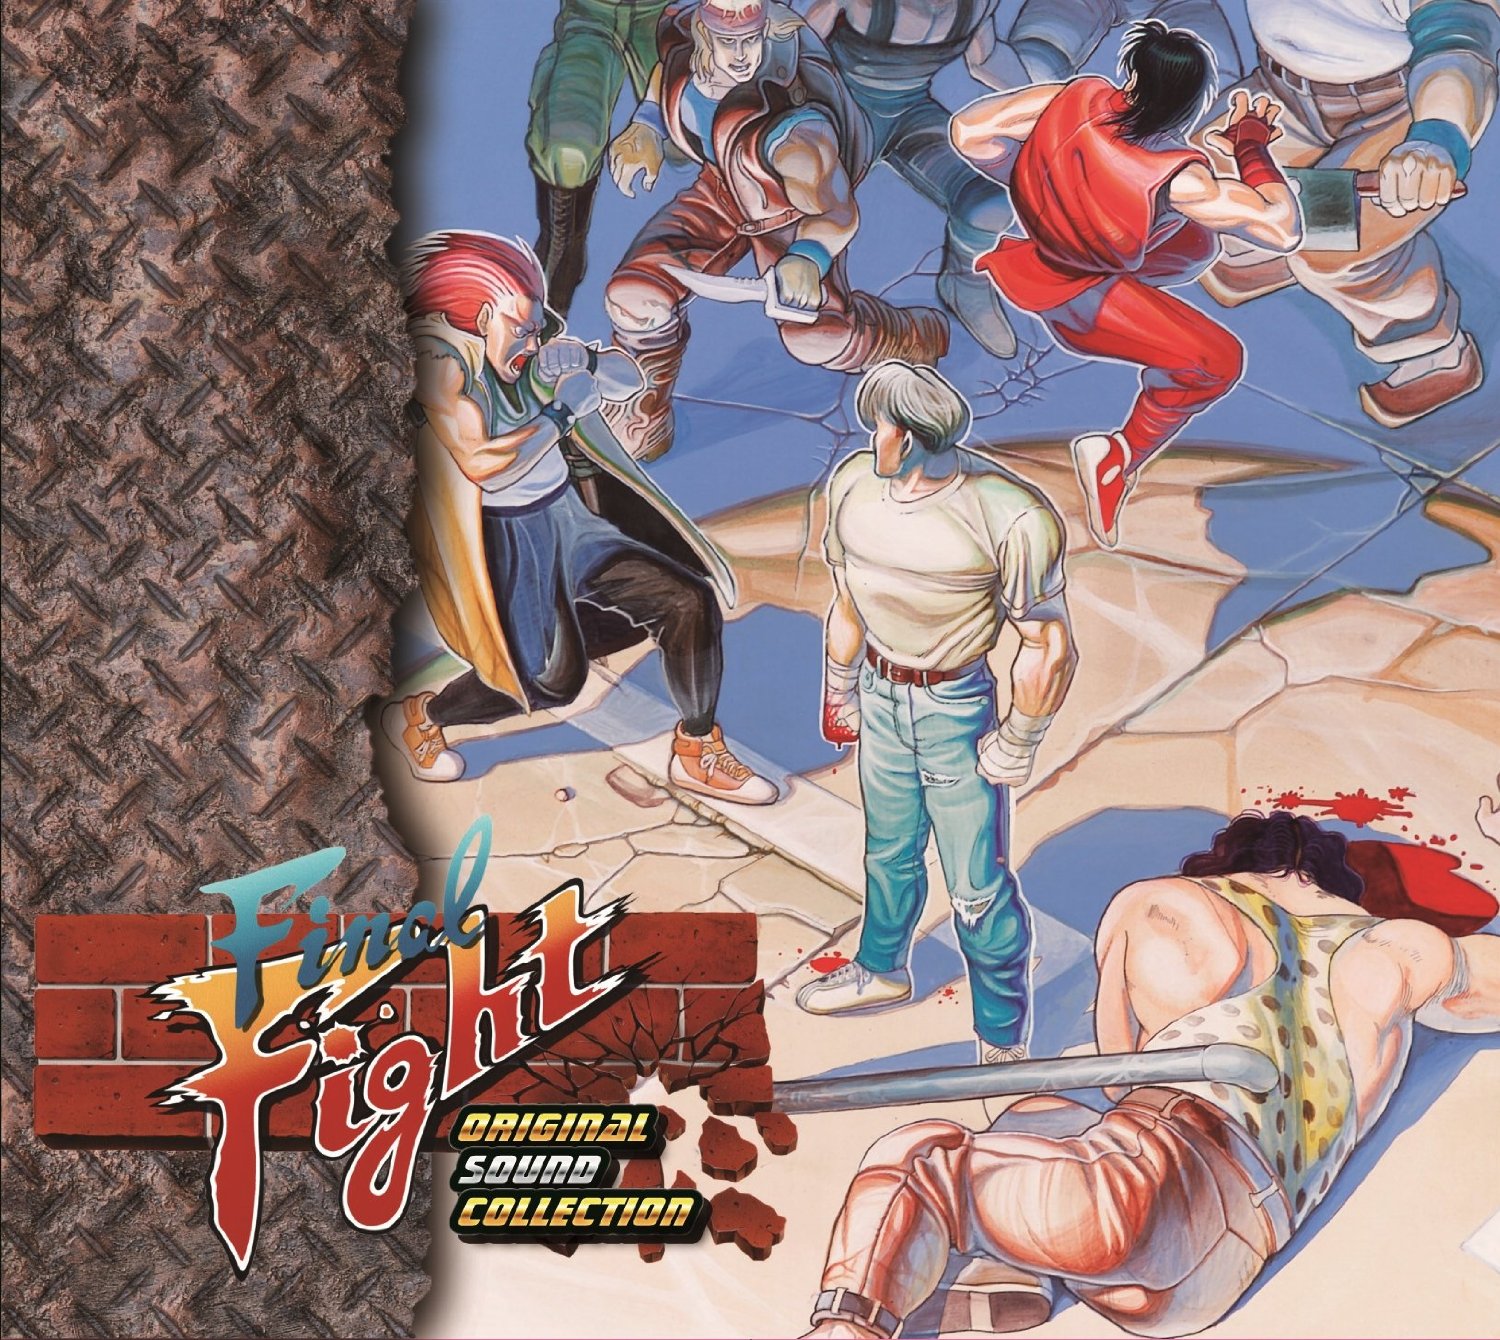 VGMO -Video Game Music Online- » Final Fight Original Sound Collection